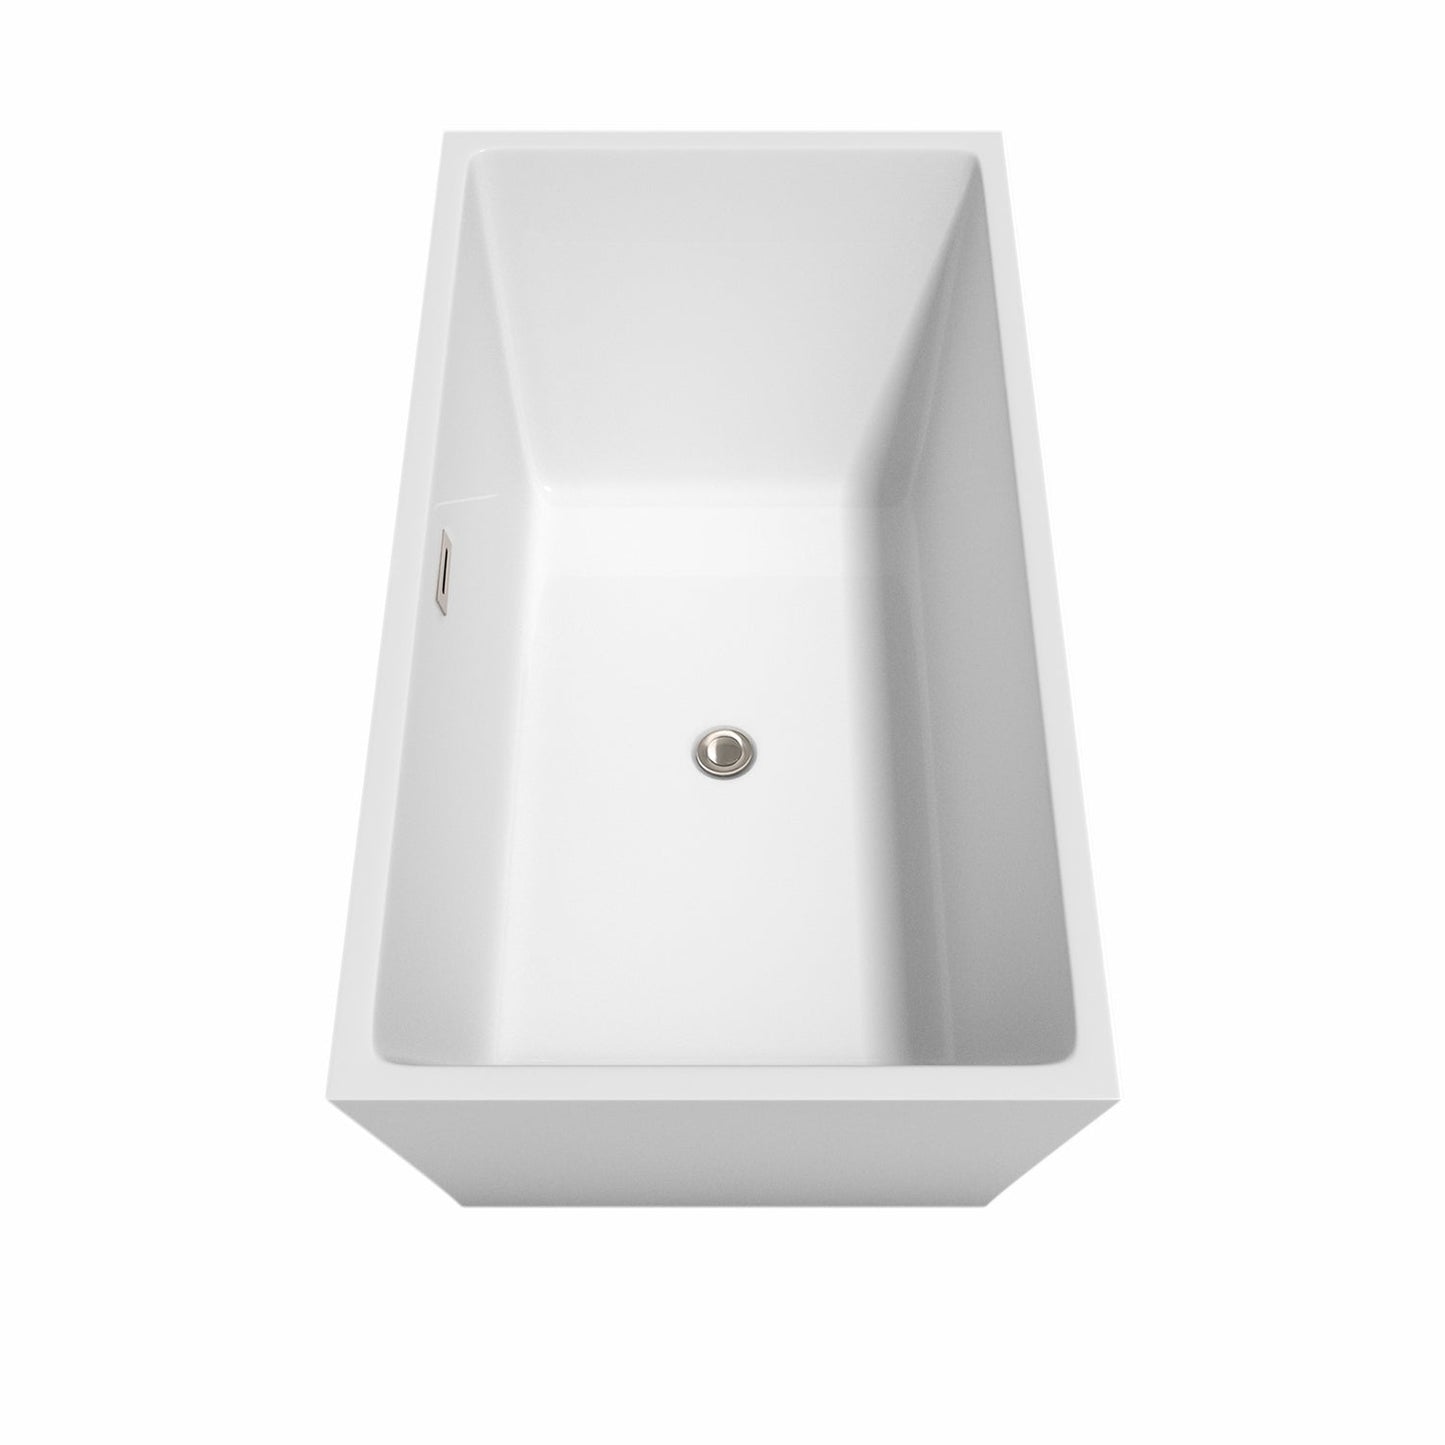 Wyndham Collection Sara 59" Freestanding Bathtub in White With Floor Mounted Faucet, Drain and Overflow Trim in Brushed Nickel